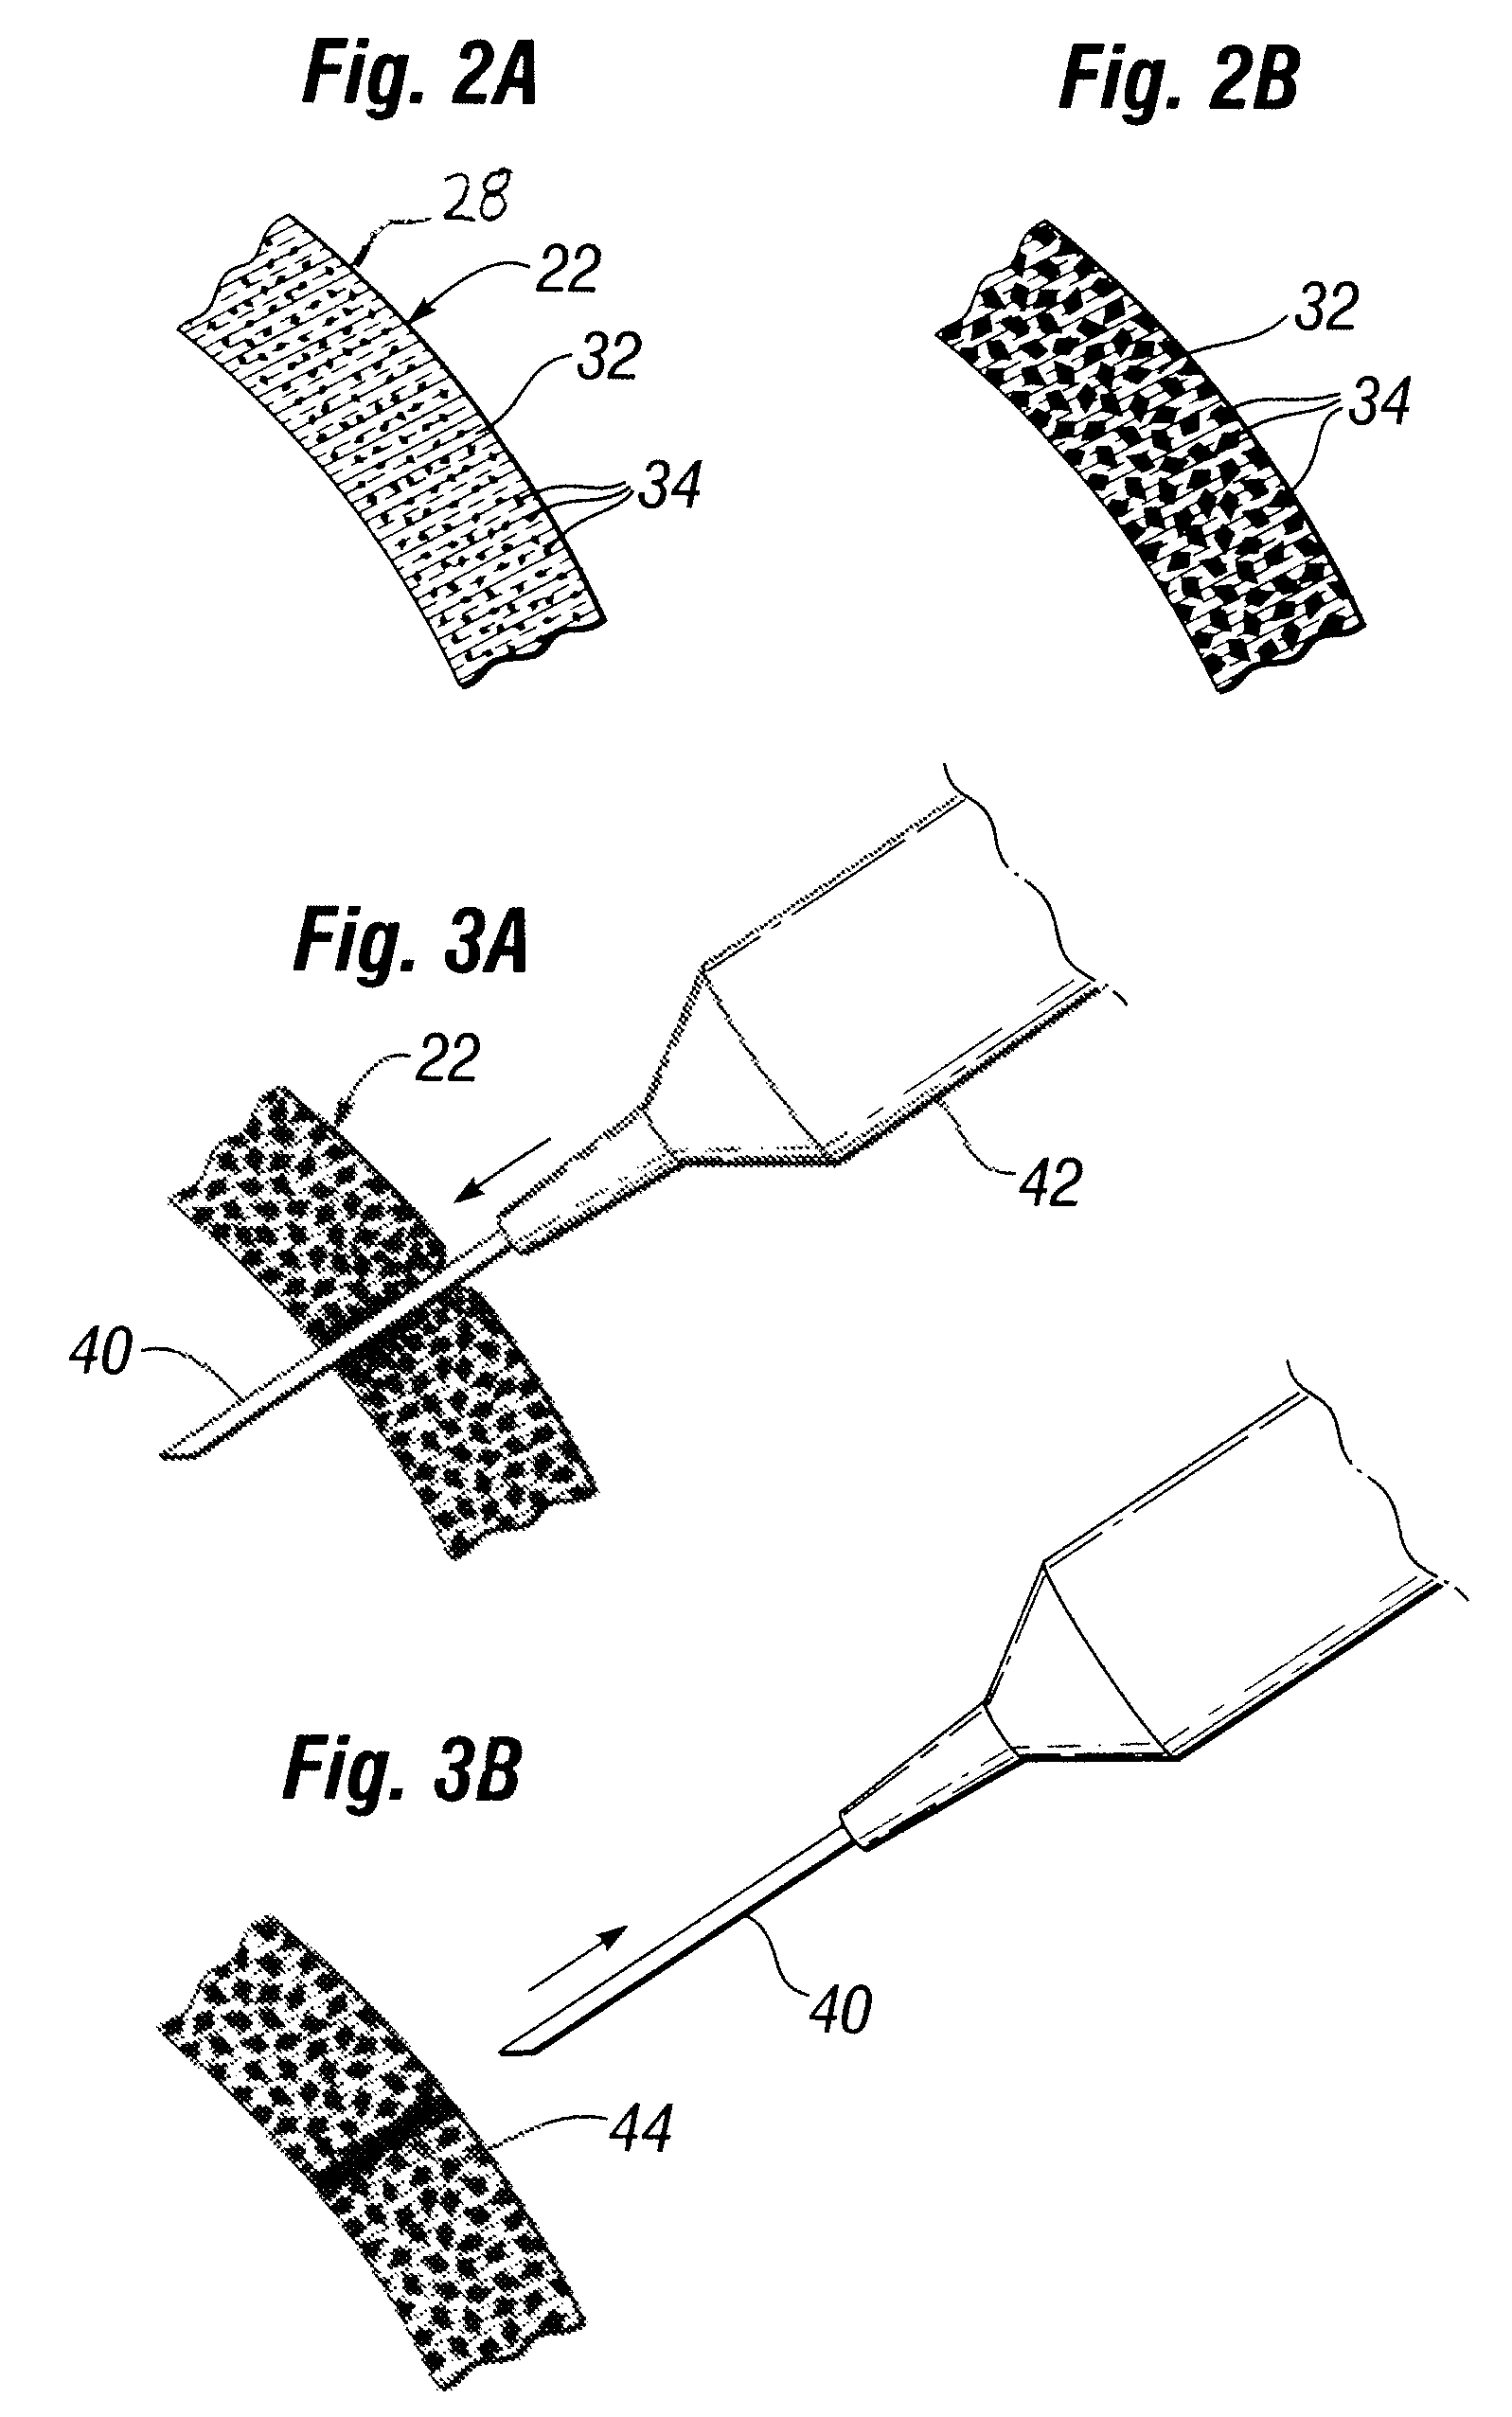 Self-sealing shell for inflatable prostheses